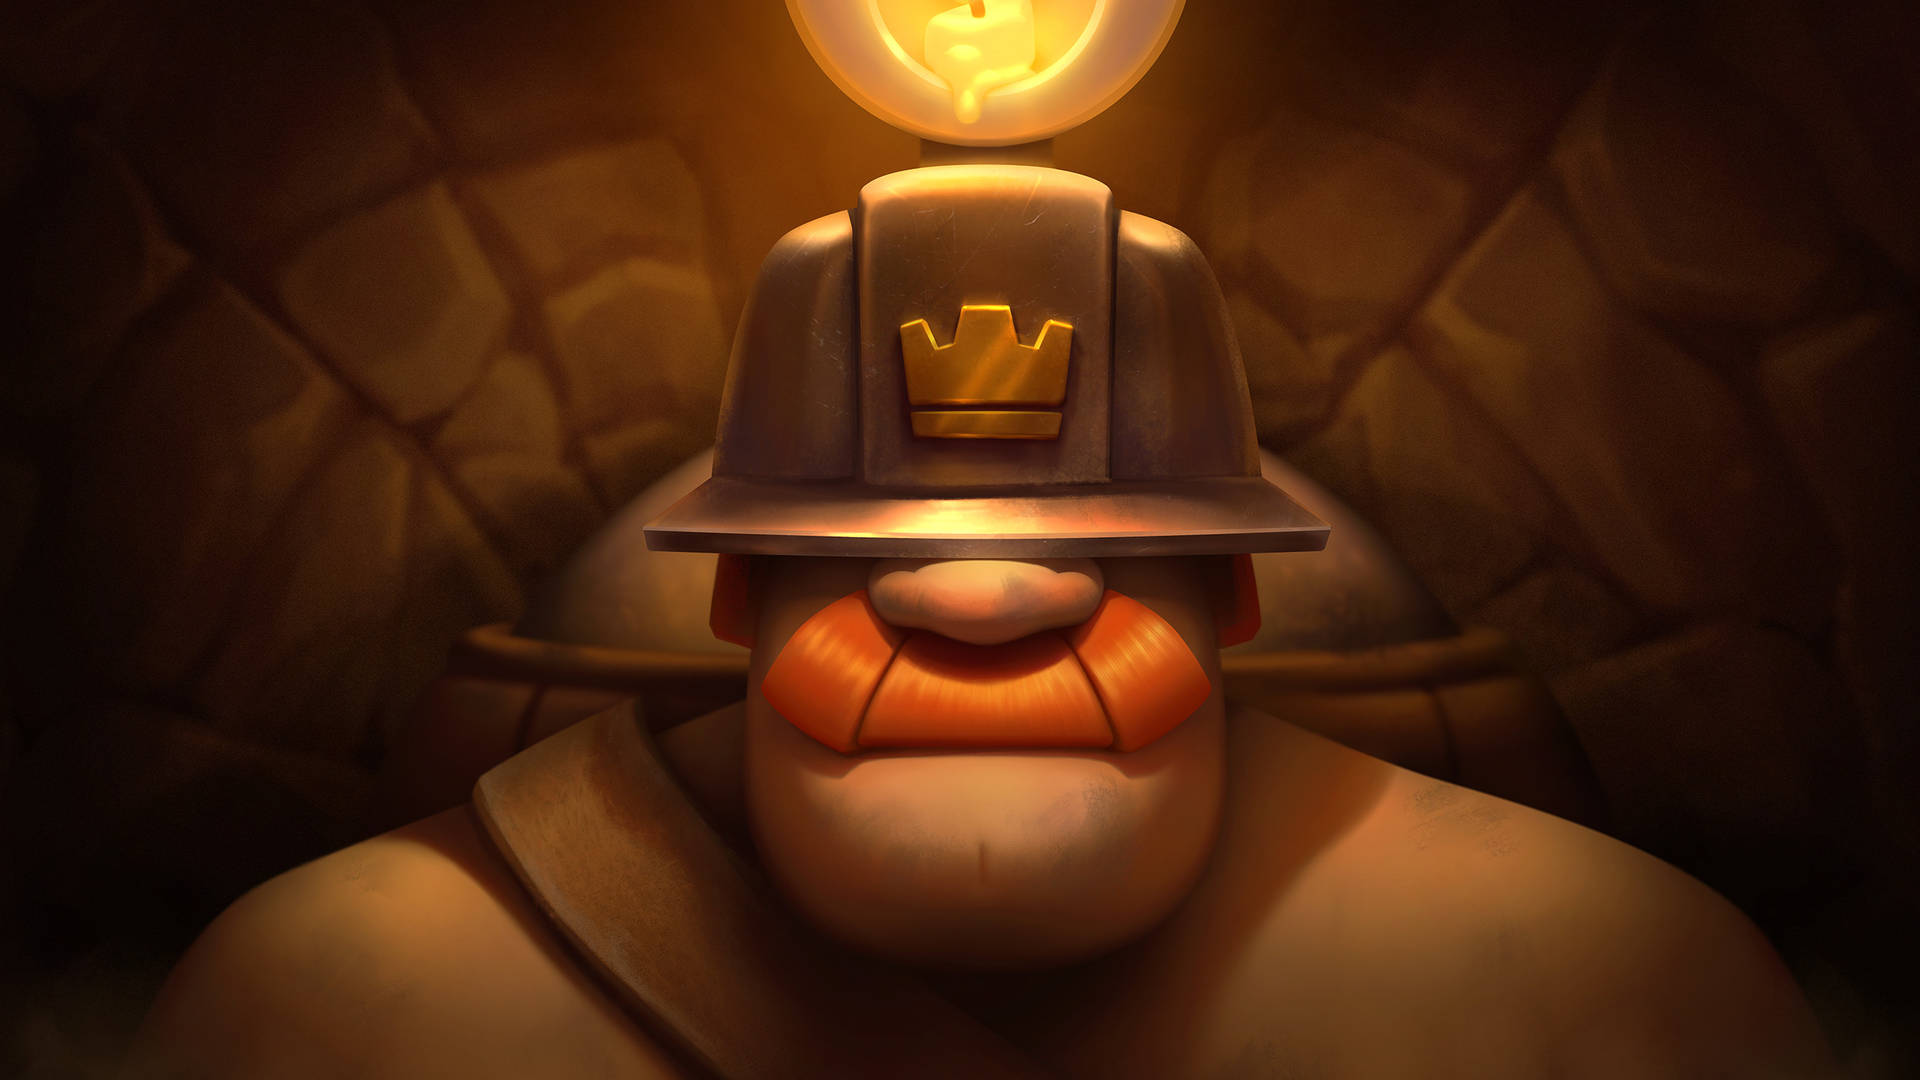 The Mighty Miner From The Clash Royale Phone Game